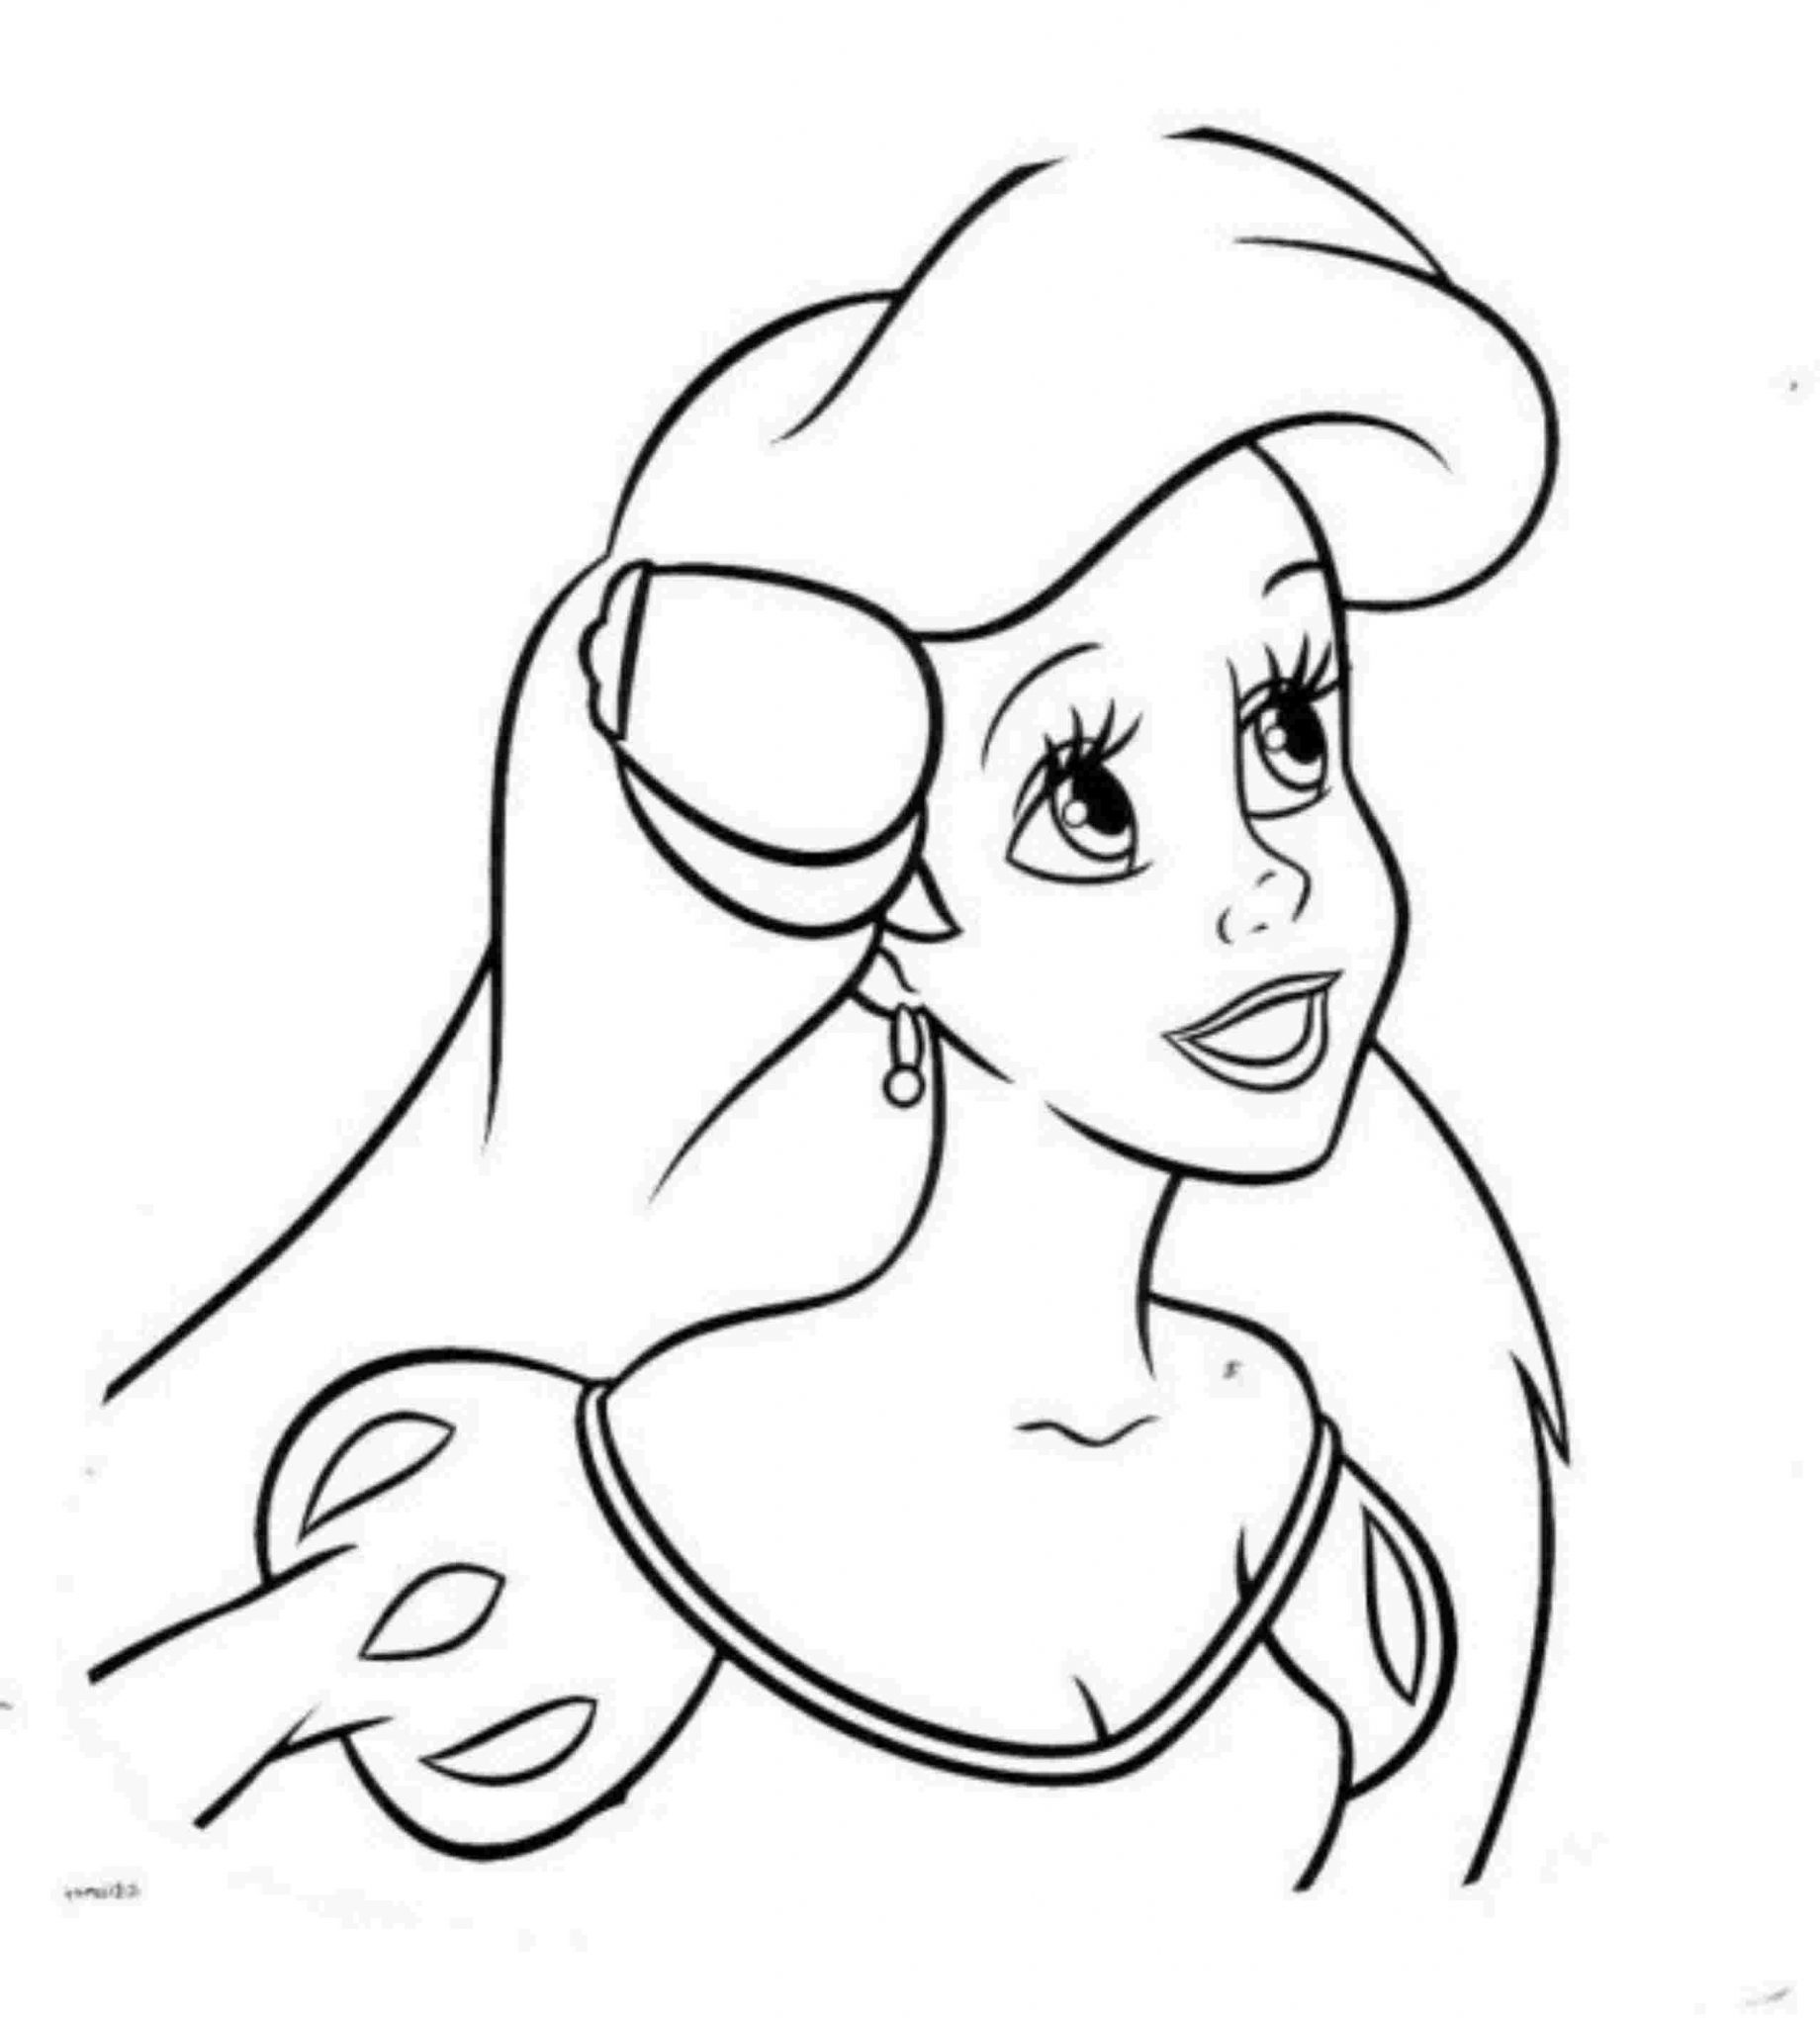 Print & Download Find the Suitable Little Mermaid Coloring Pages for